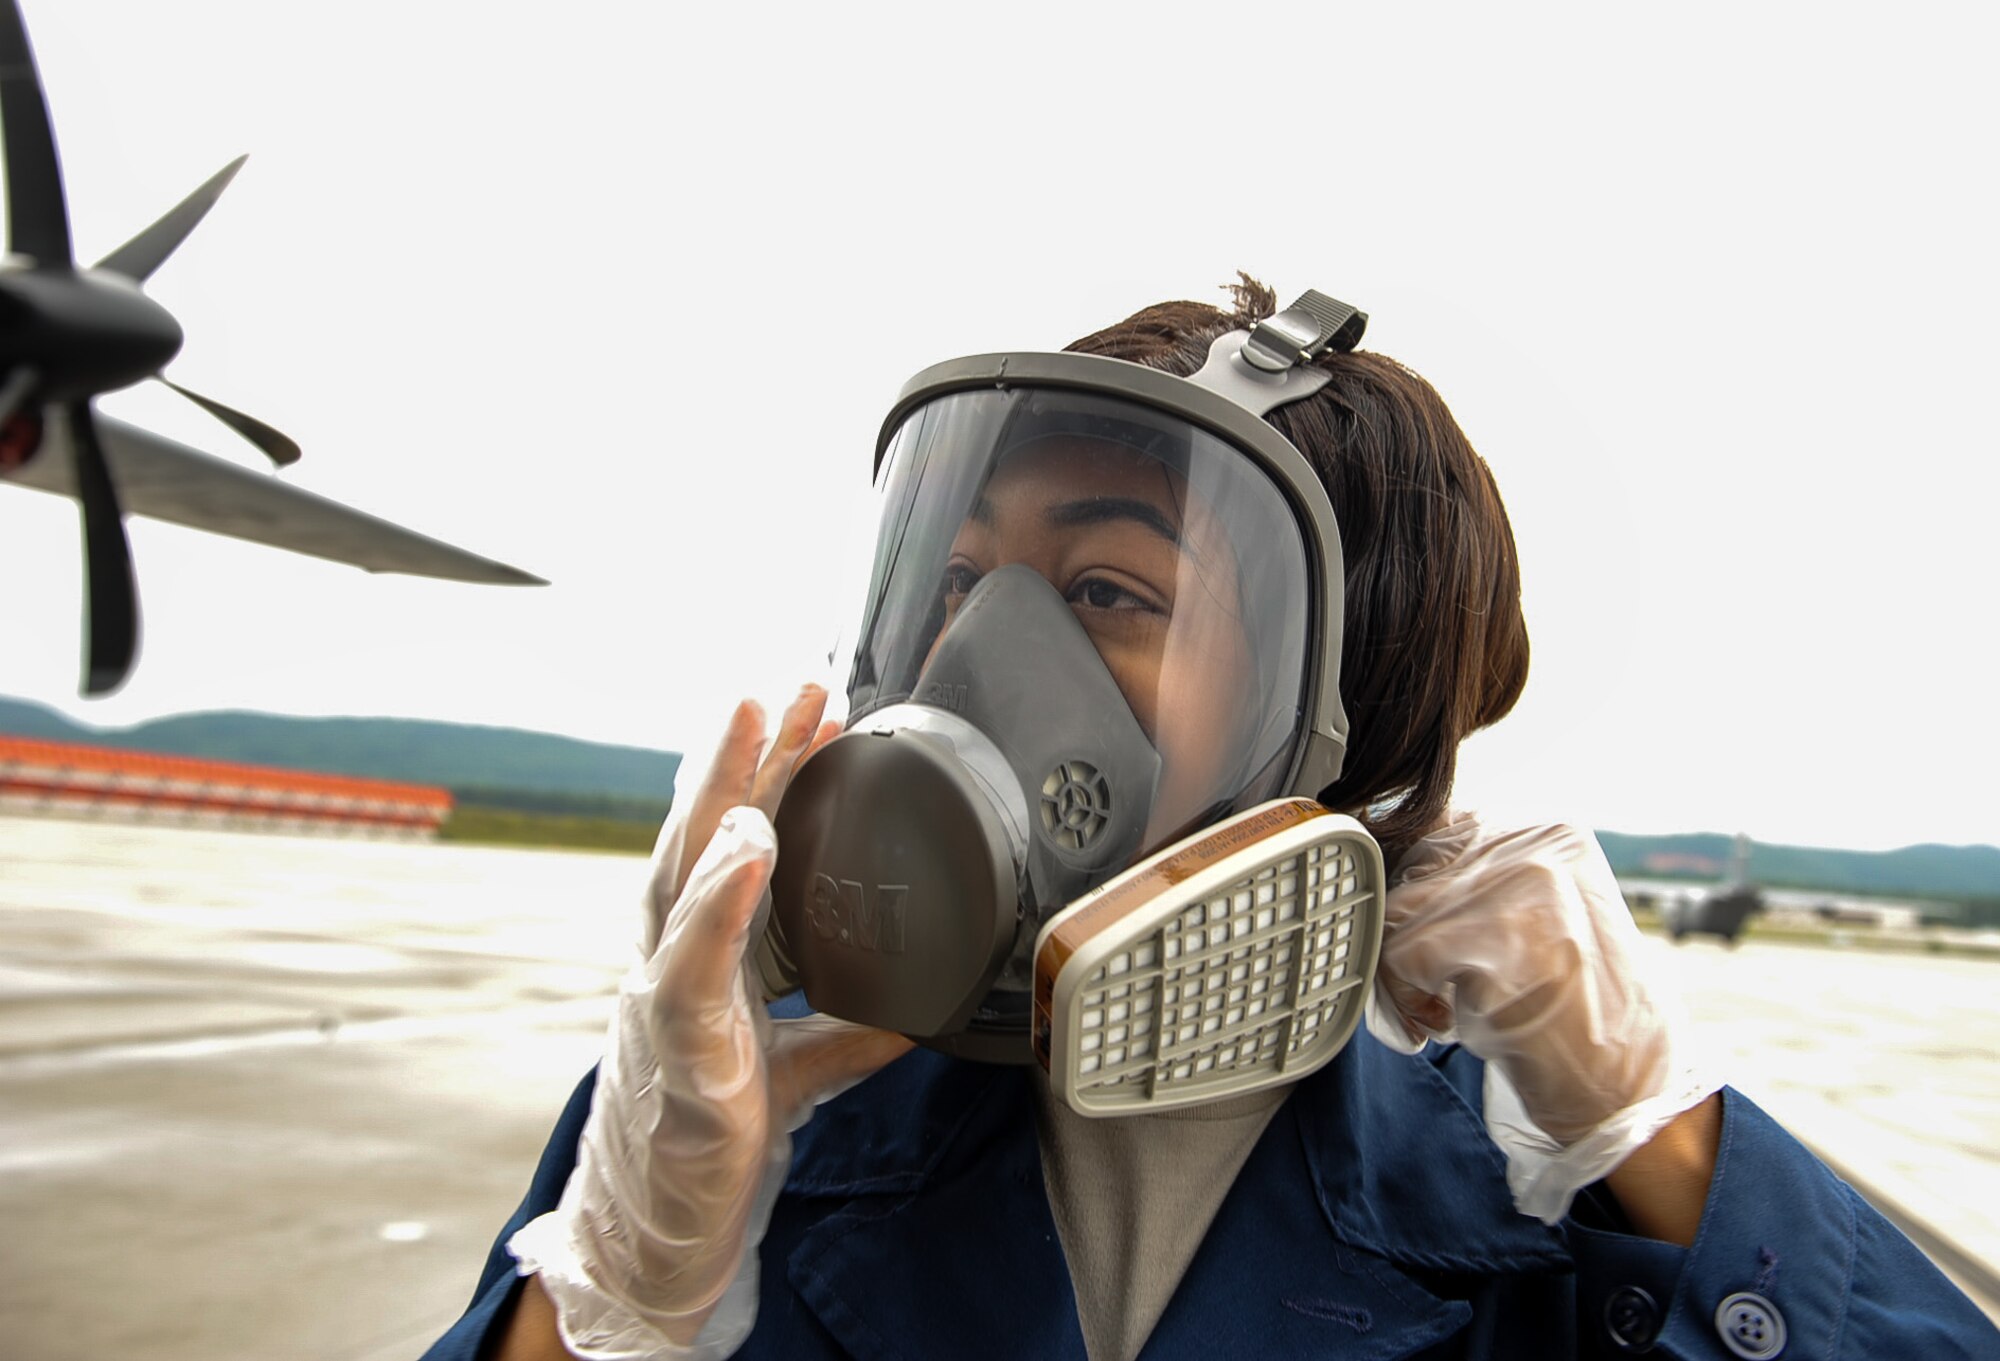 Airman 1st Class Arielle Howze, 786th Civil Engineer Squadron pest management journeyman, tightens her respirator before spraying aircraft insecticide on Ramstein Air Base, Germany, July 27, 2017. The aircraft insecticide helps prevent the spread of insects and the bacteria or viruses they carry, which can cause disease in humans, plants, and animals. (U.S. Air Force Airman 1st Class Savannah L. Waters)